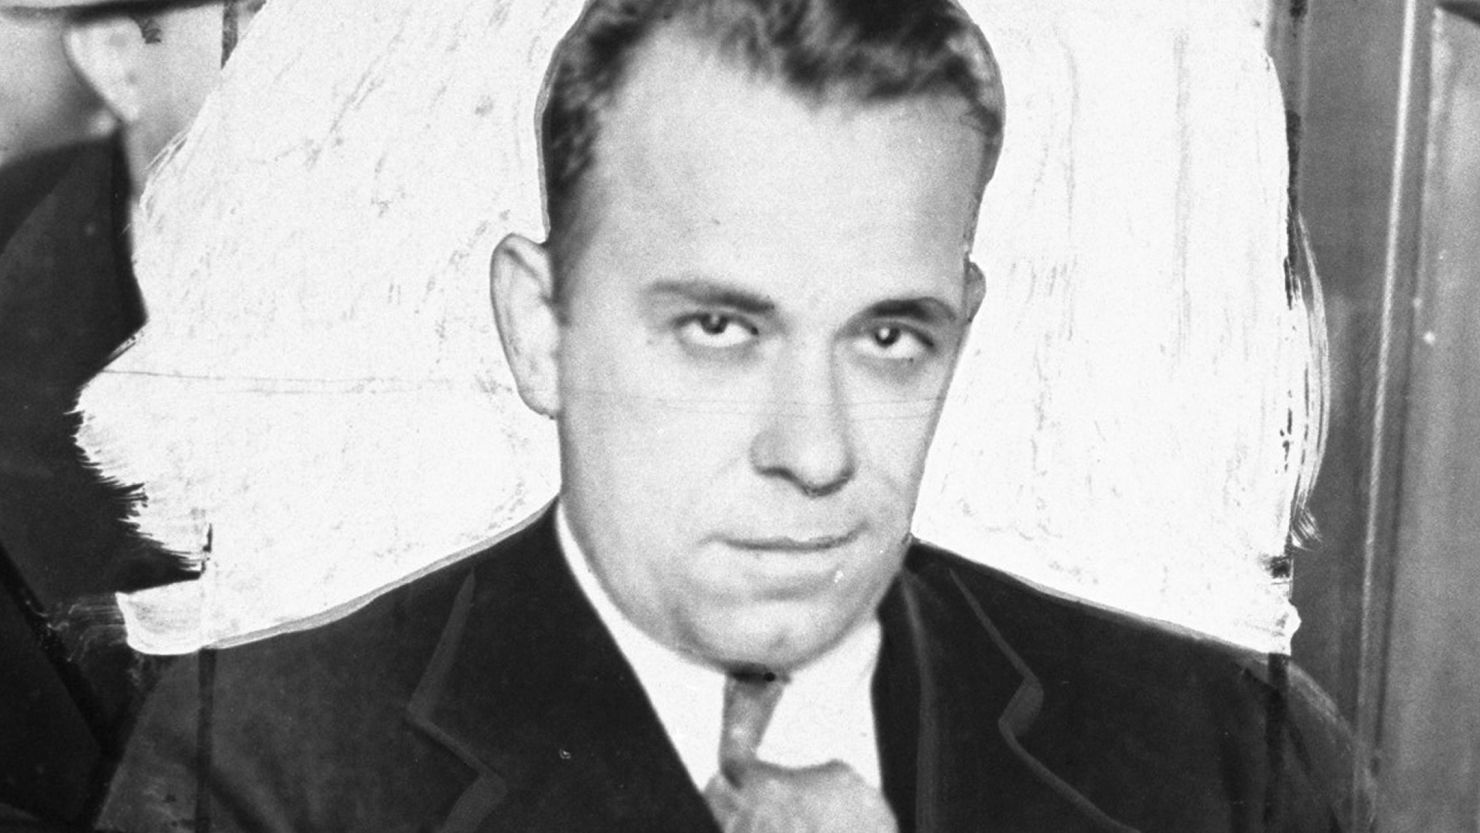 John Dillinger as he looked while being taken from Tuscon, Arizona to Crown Point, Indiana, where he later escaped.